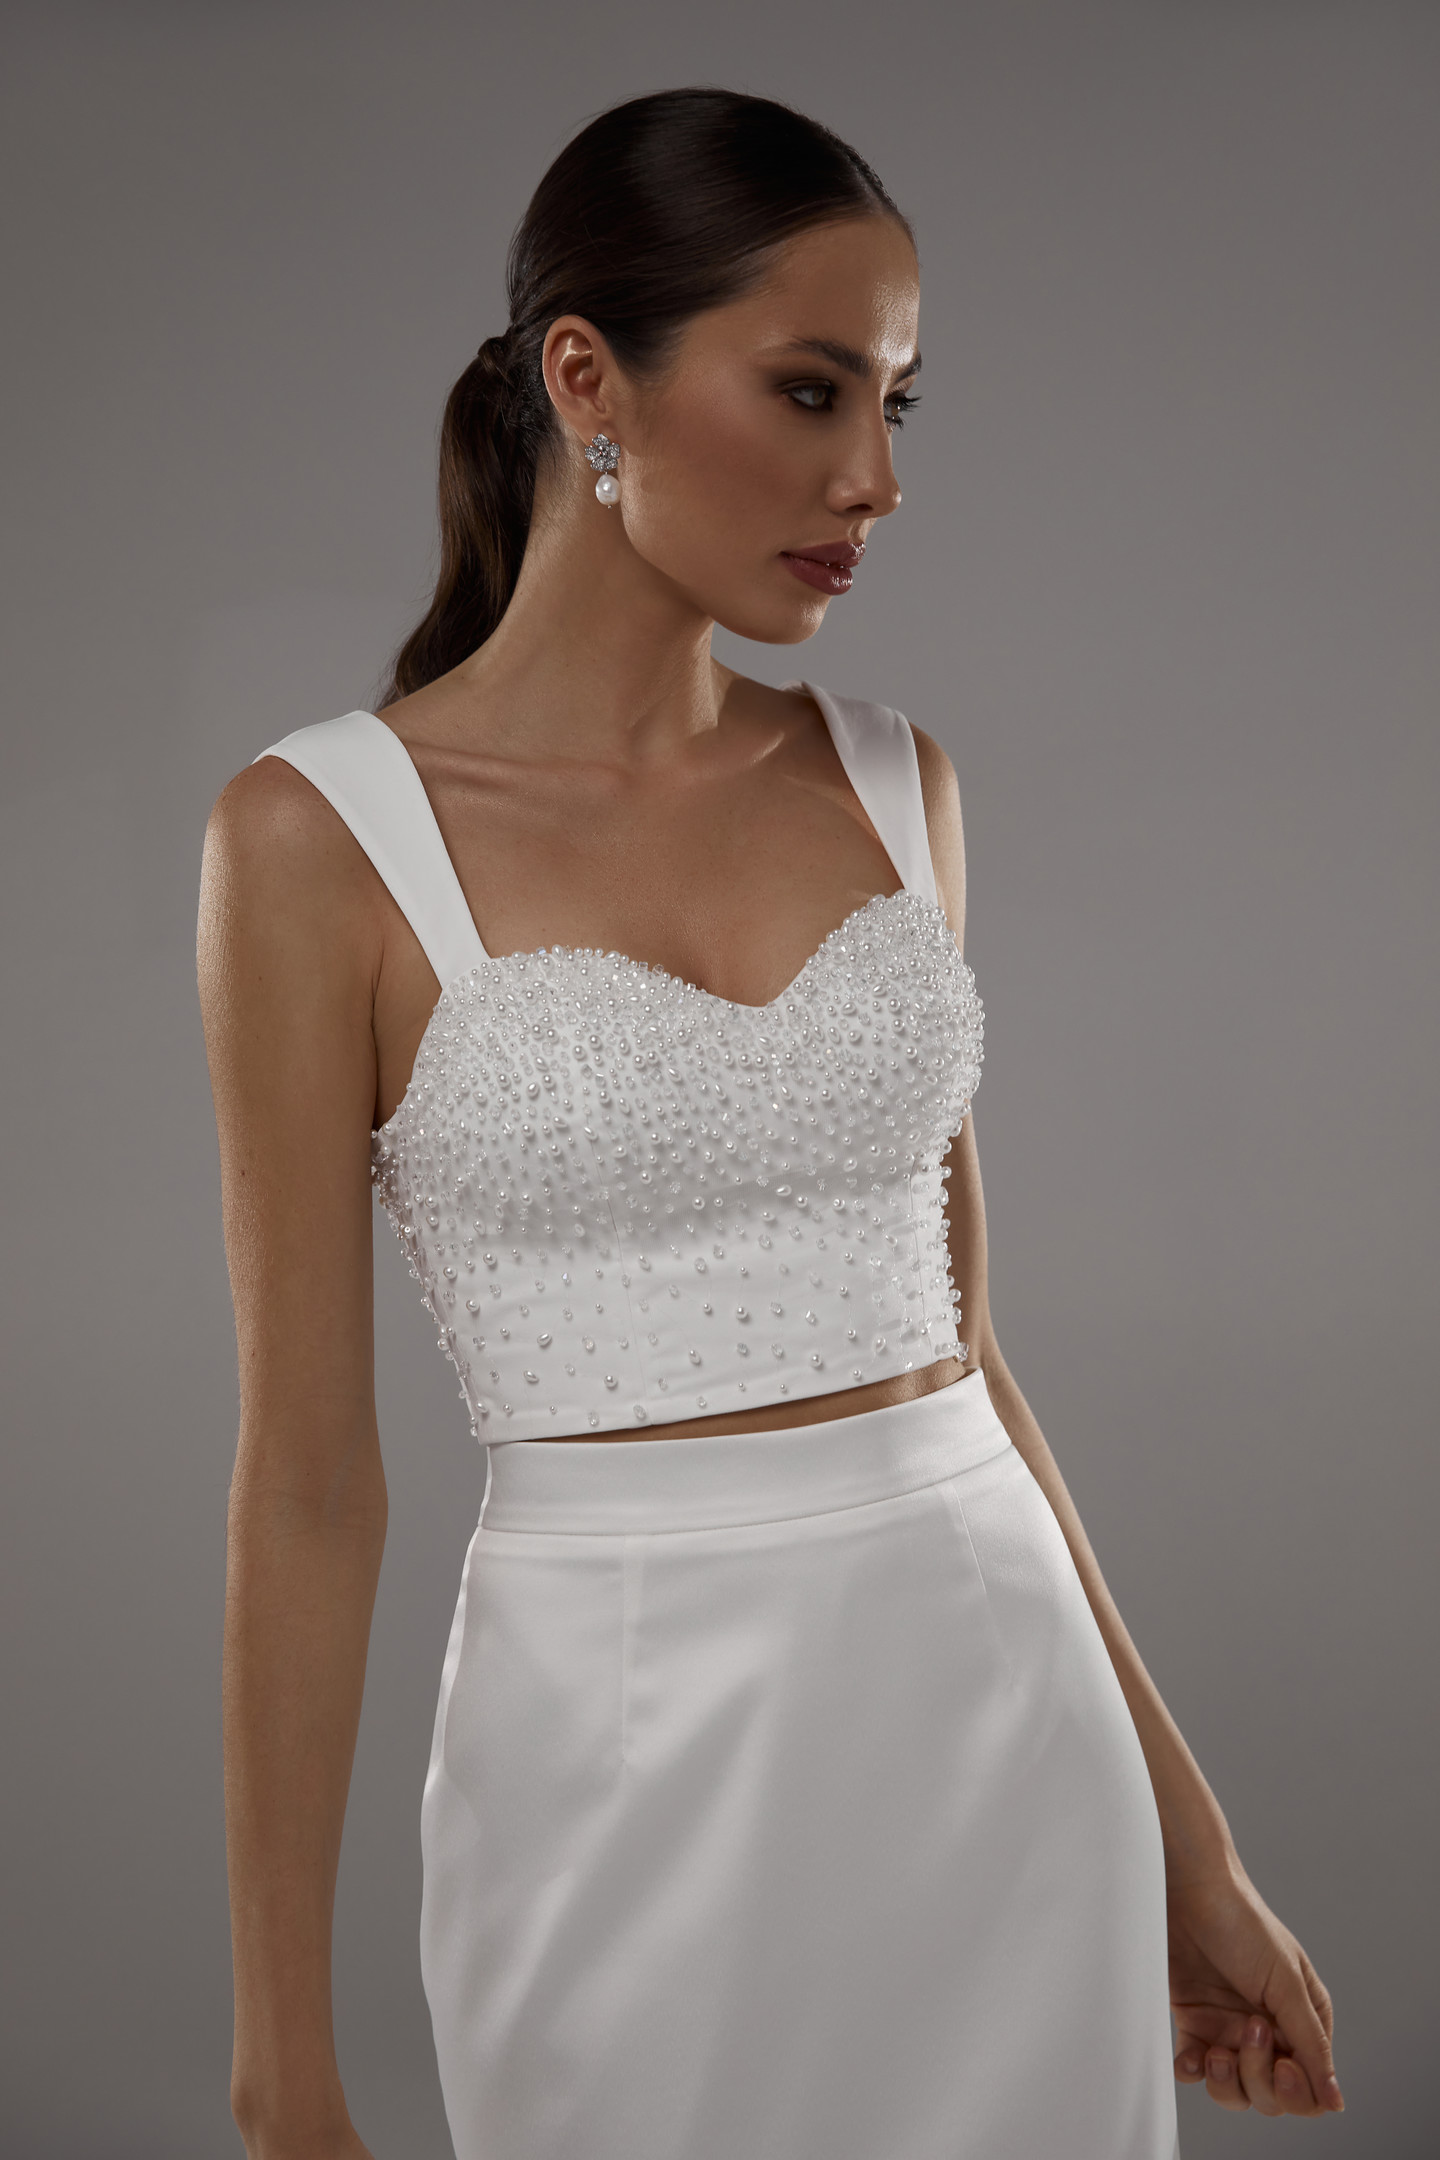 Beaded bustier, 2021, couture, top, bridal, off-white, bridal corset and skirt #3, embroidery